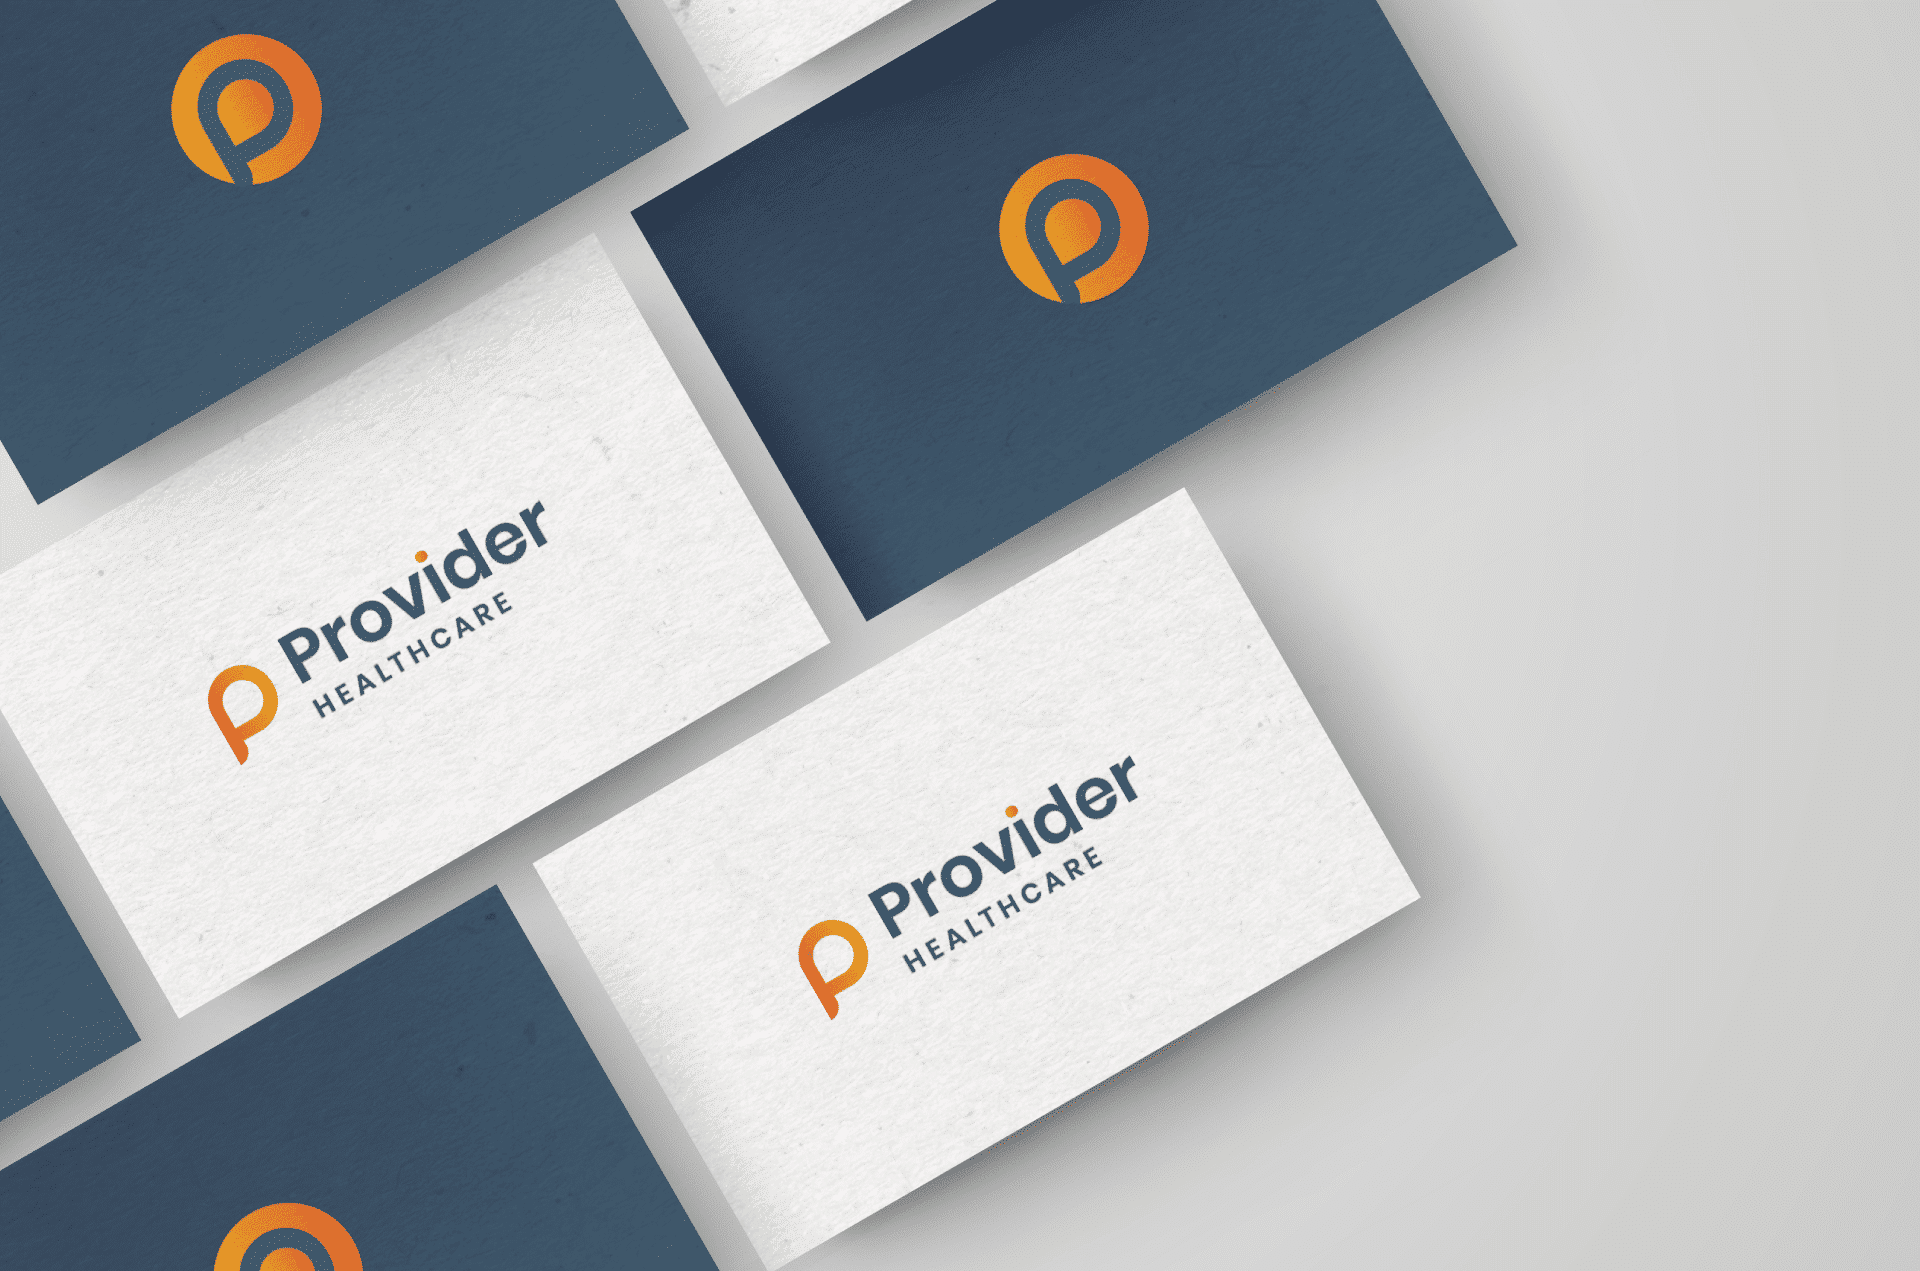 Provider Healthcare logo design as business cards by Anchor & Alpine